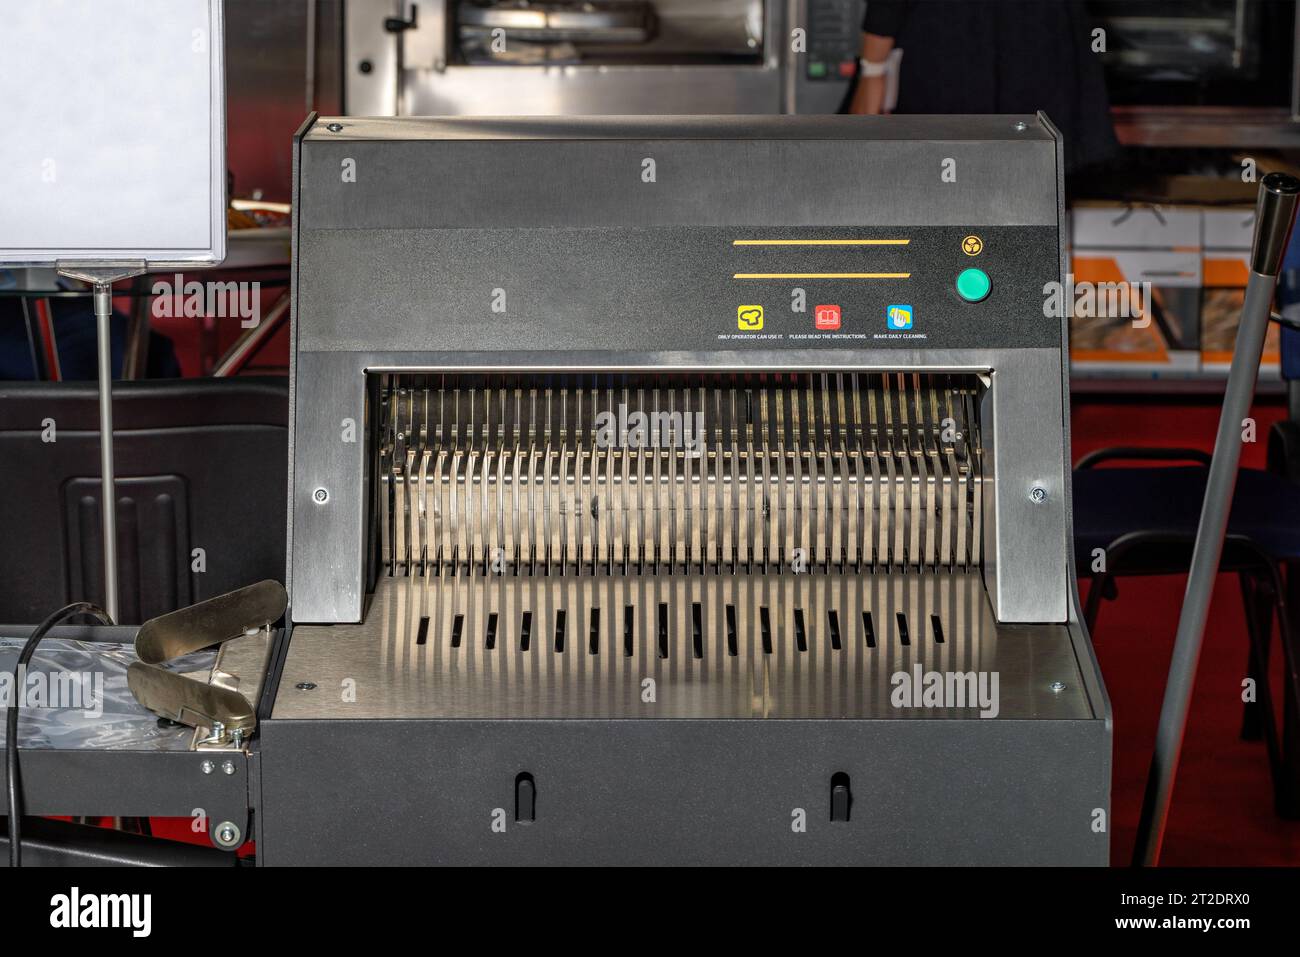 https://c8.alamy.com/comp/2T2DRX0/industrial-bread-slicing-machine-made-of-stainless-steel-for-slicing-bread-into-thin-symmetrical-slices-with-adjustable-slice-thickness-2T2DRX0.jpg